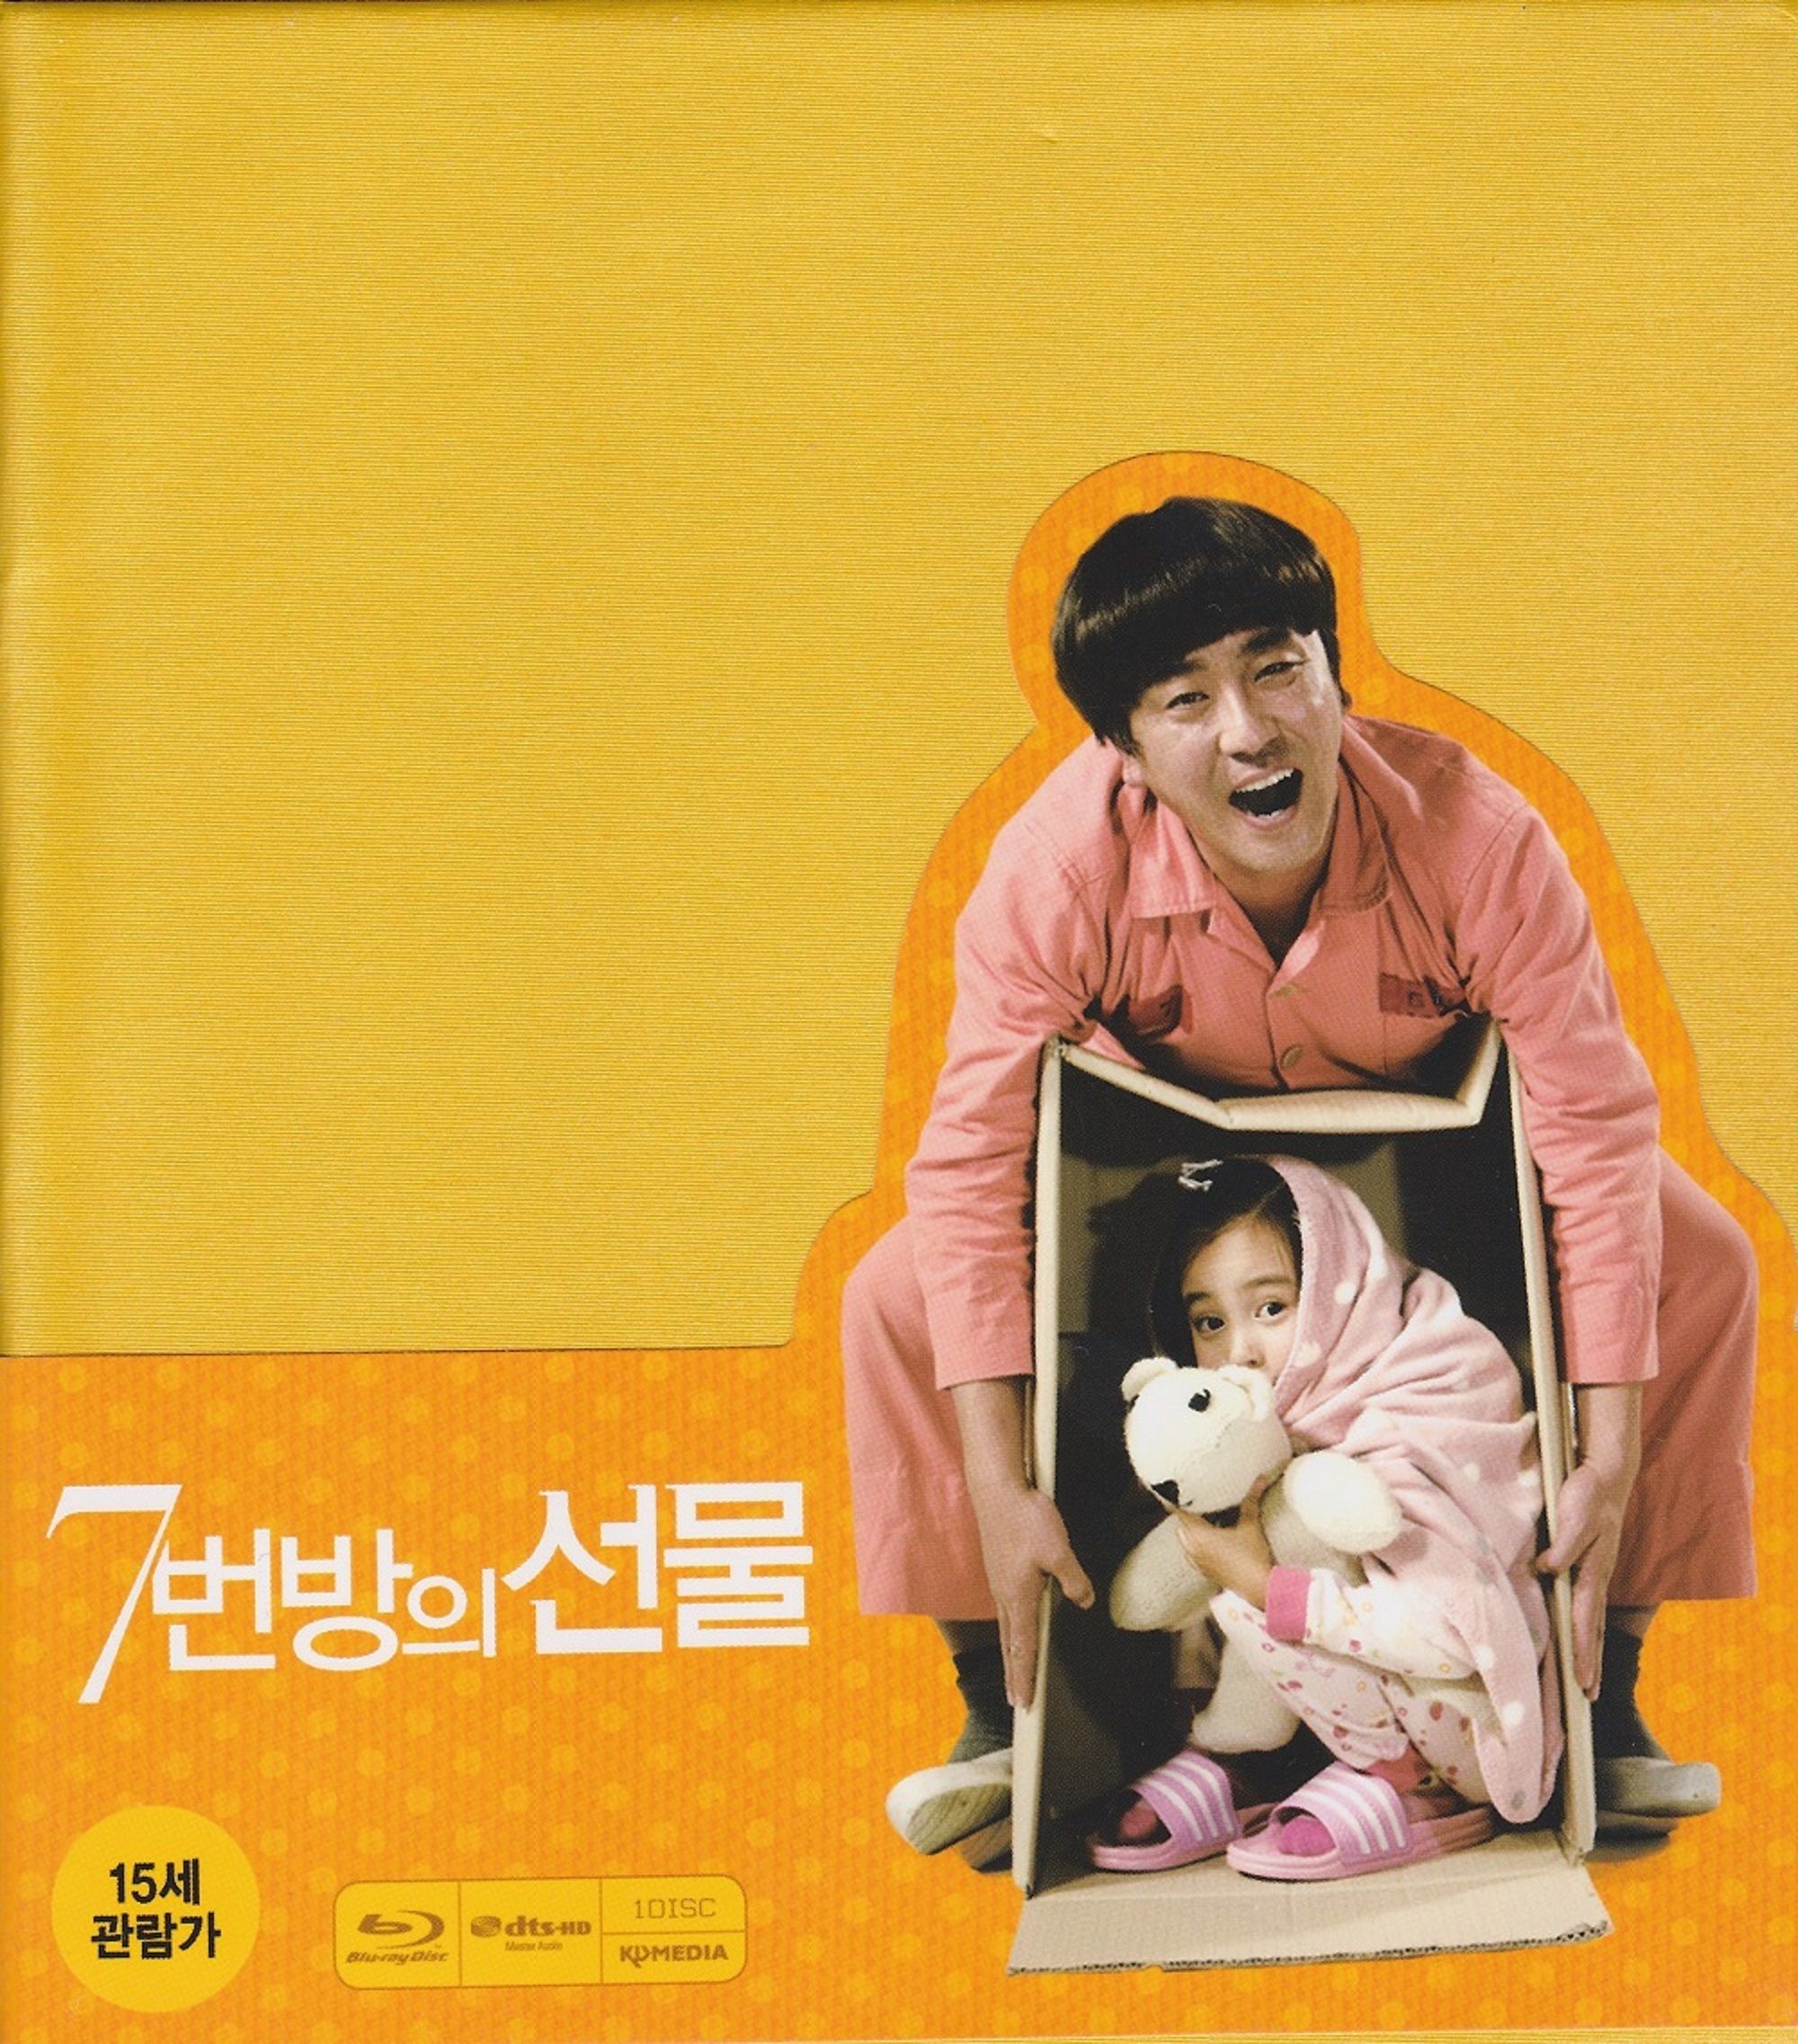 Miracle In Cell No.7 Blu Ray Release Date July 2013 (Gift Of 7th Room번방의 선물. First Press Limited Edition) (South Korea)